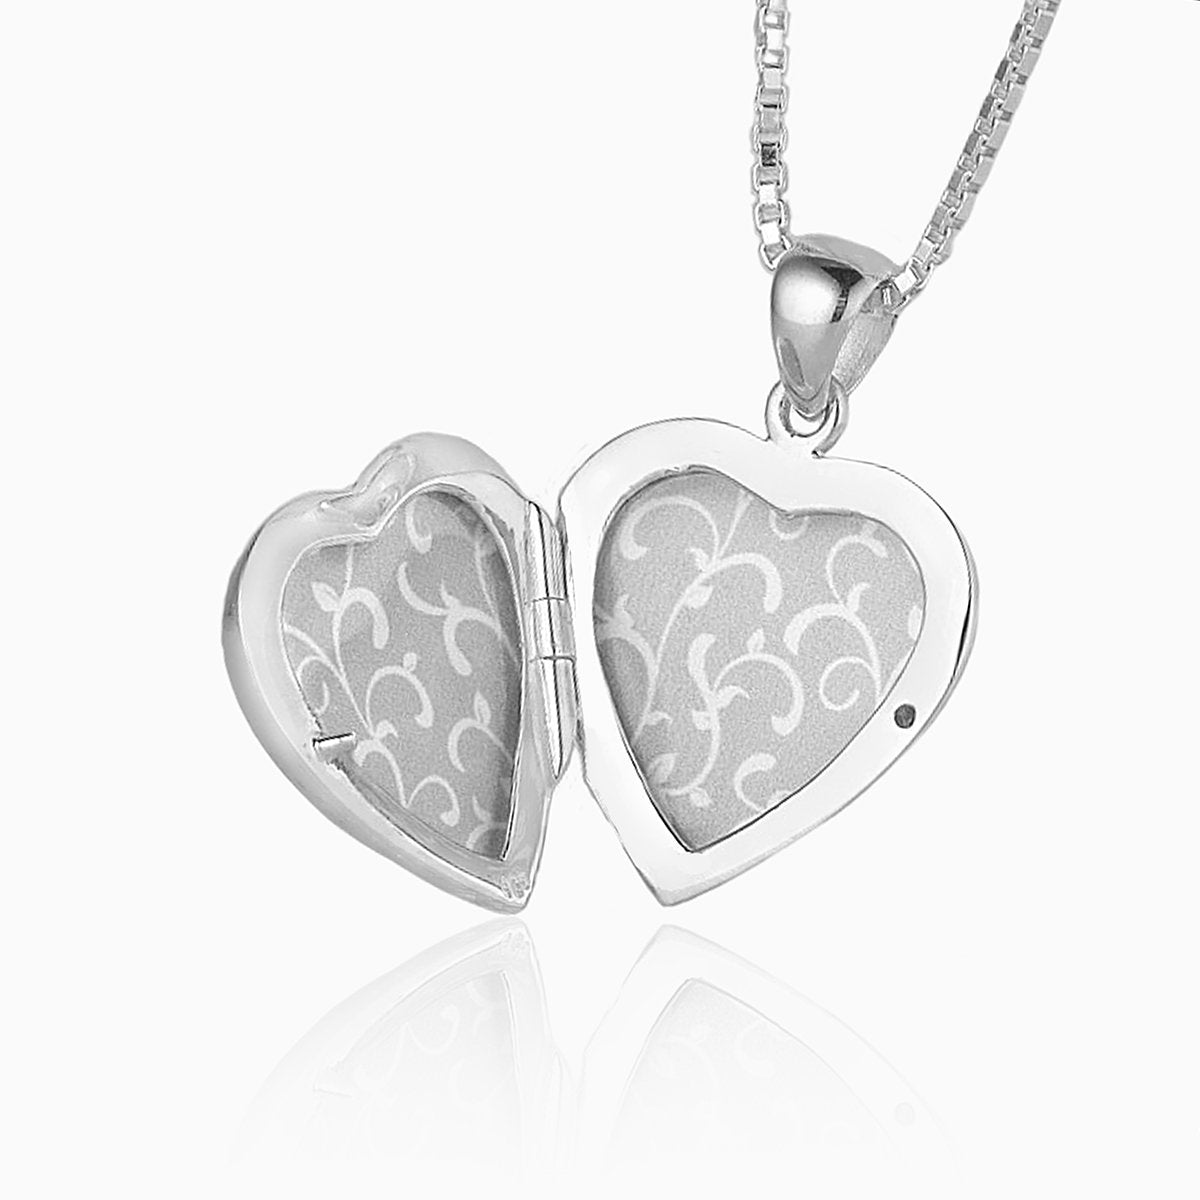 Product title: Entwined Hearts Locket, product type: Locket